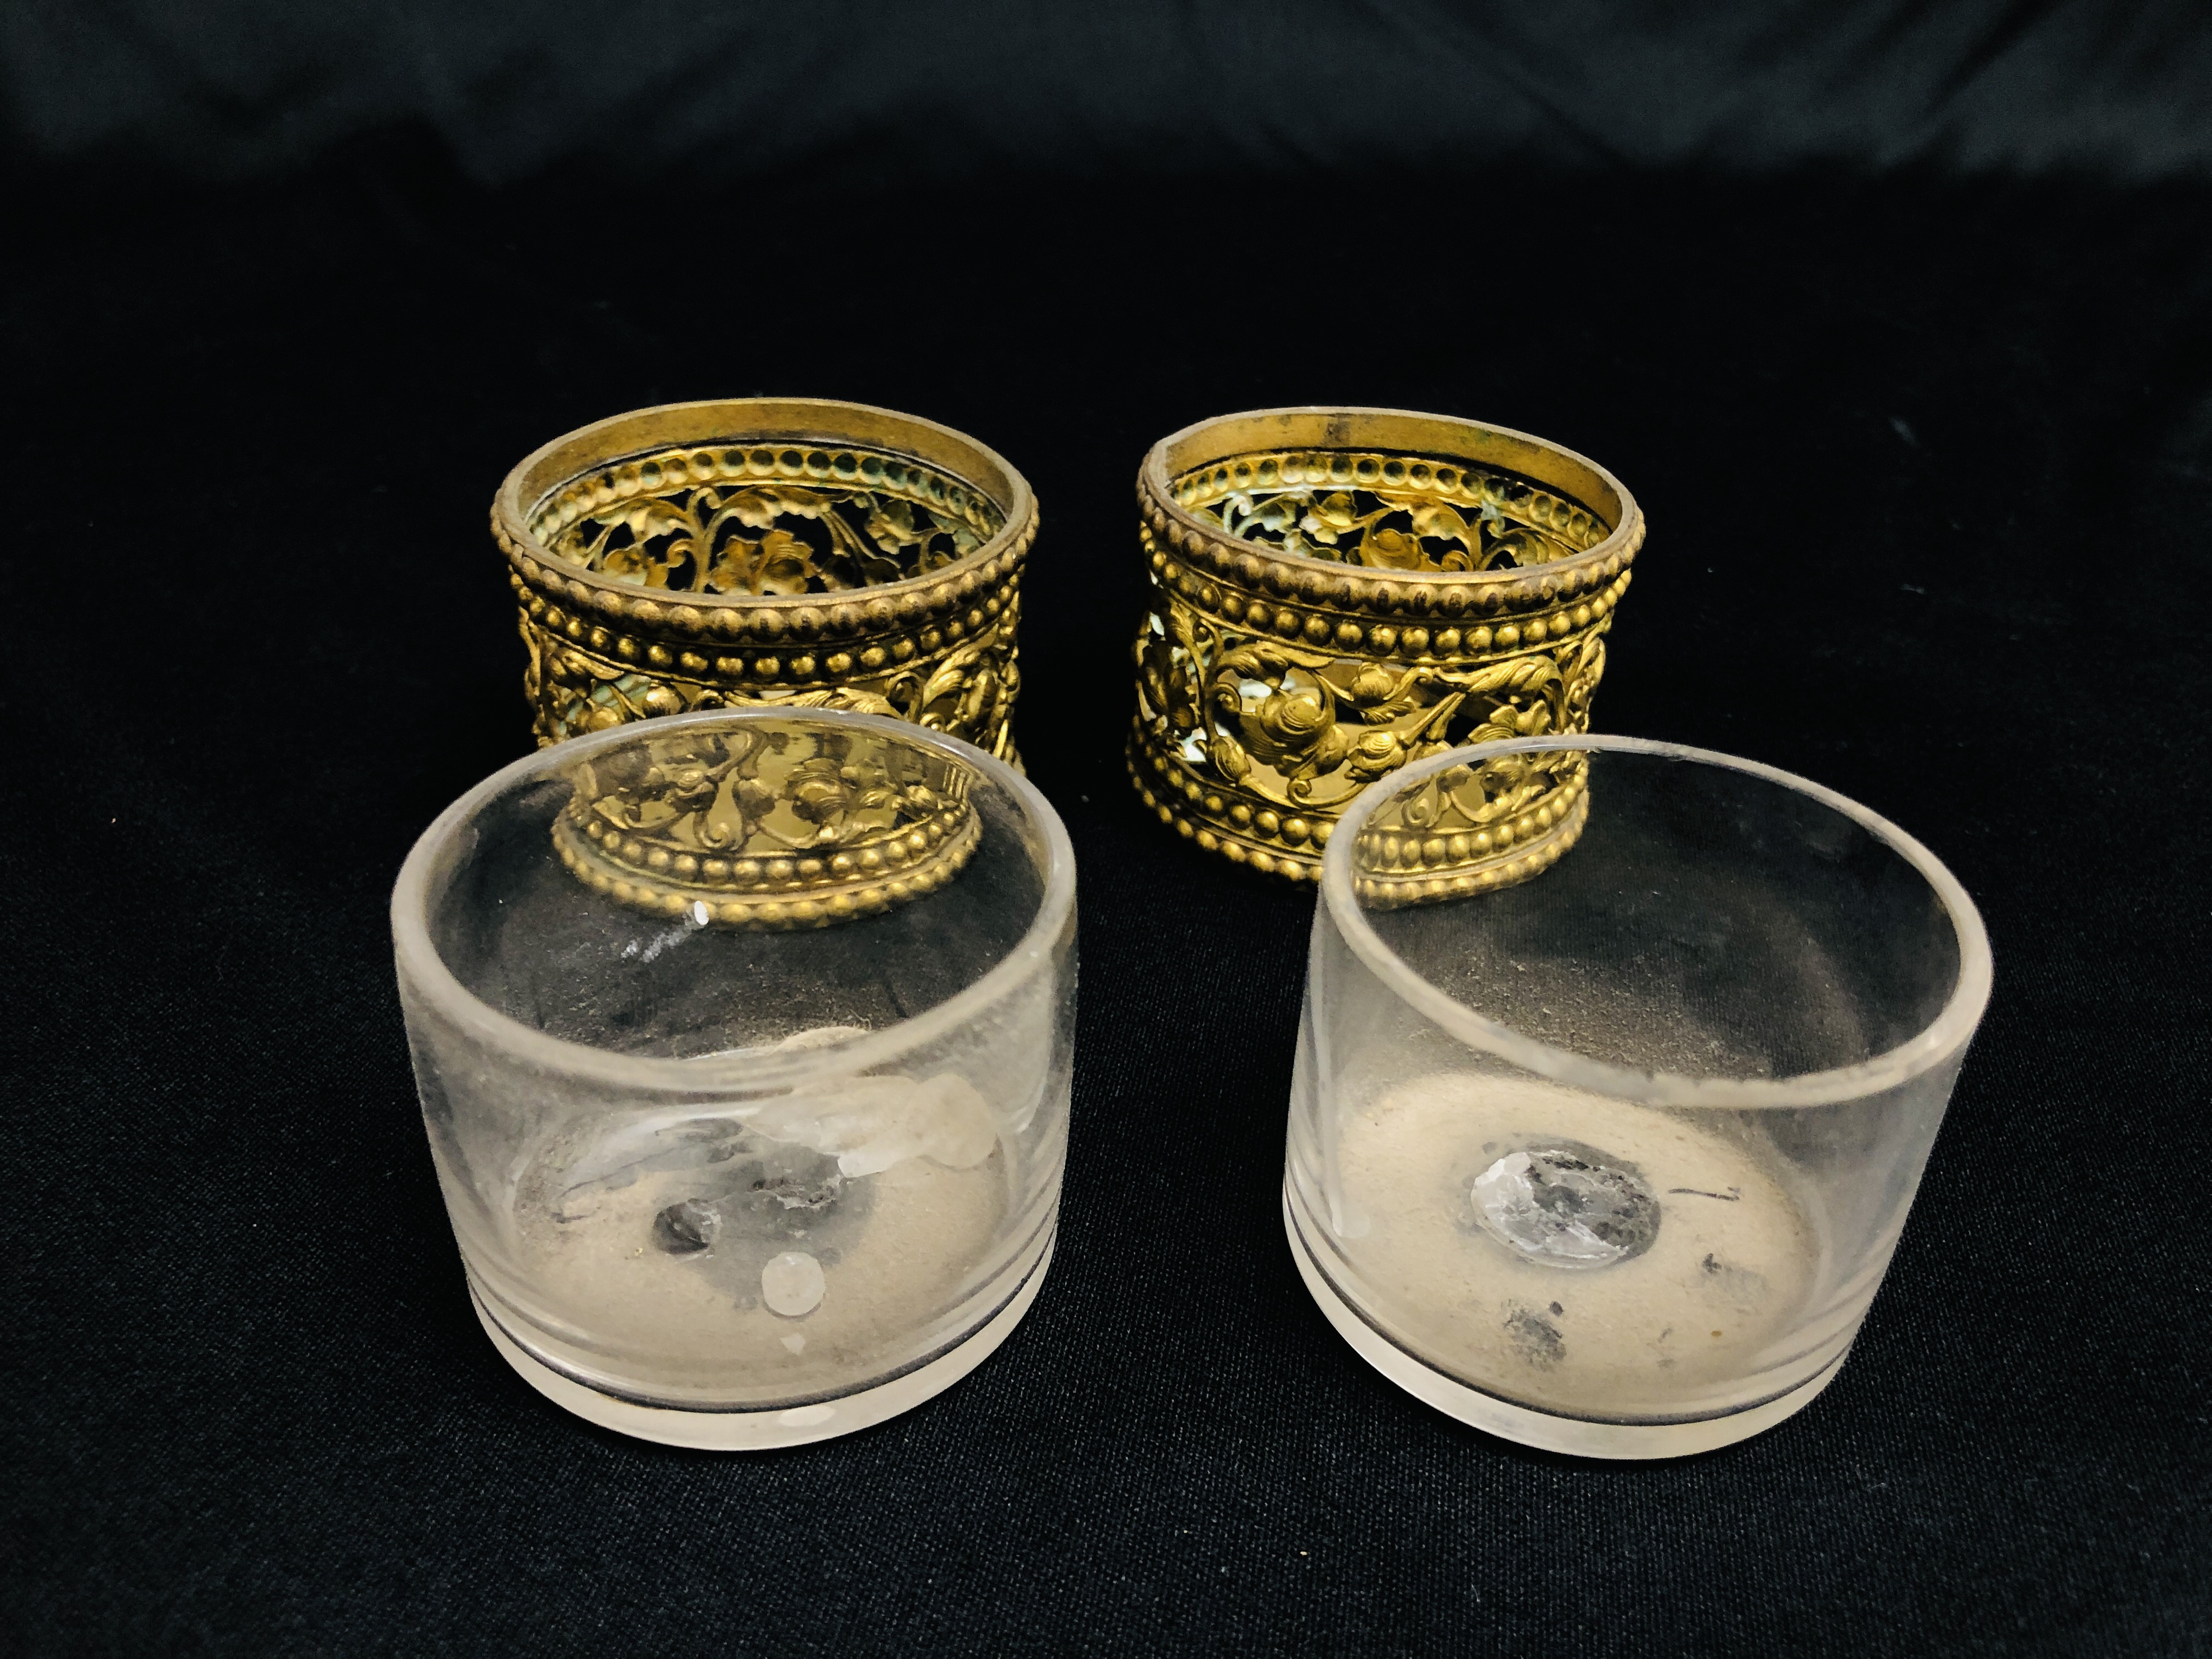 PAIR OF ANTIQUE GILT METAL SALTS WITH CLEAR GLASS LINERS - Image 4 of 4